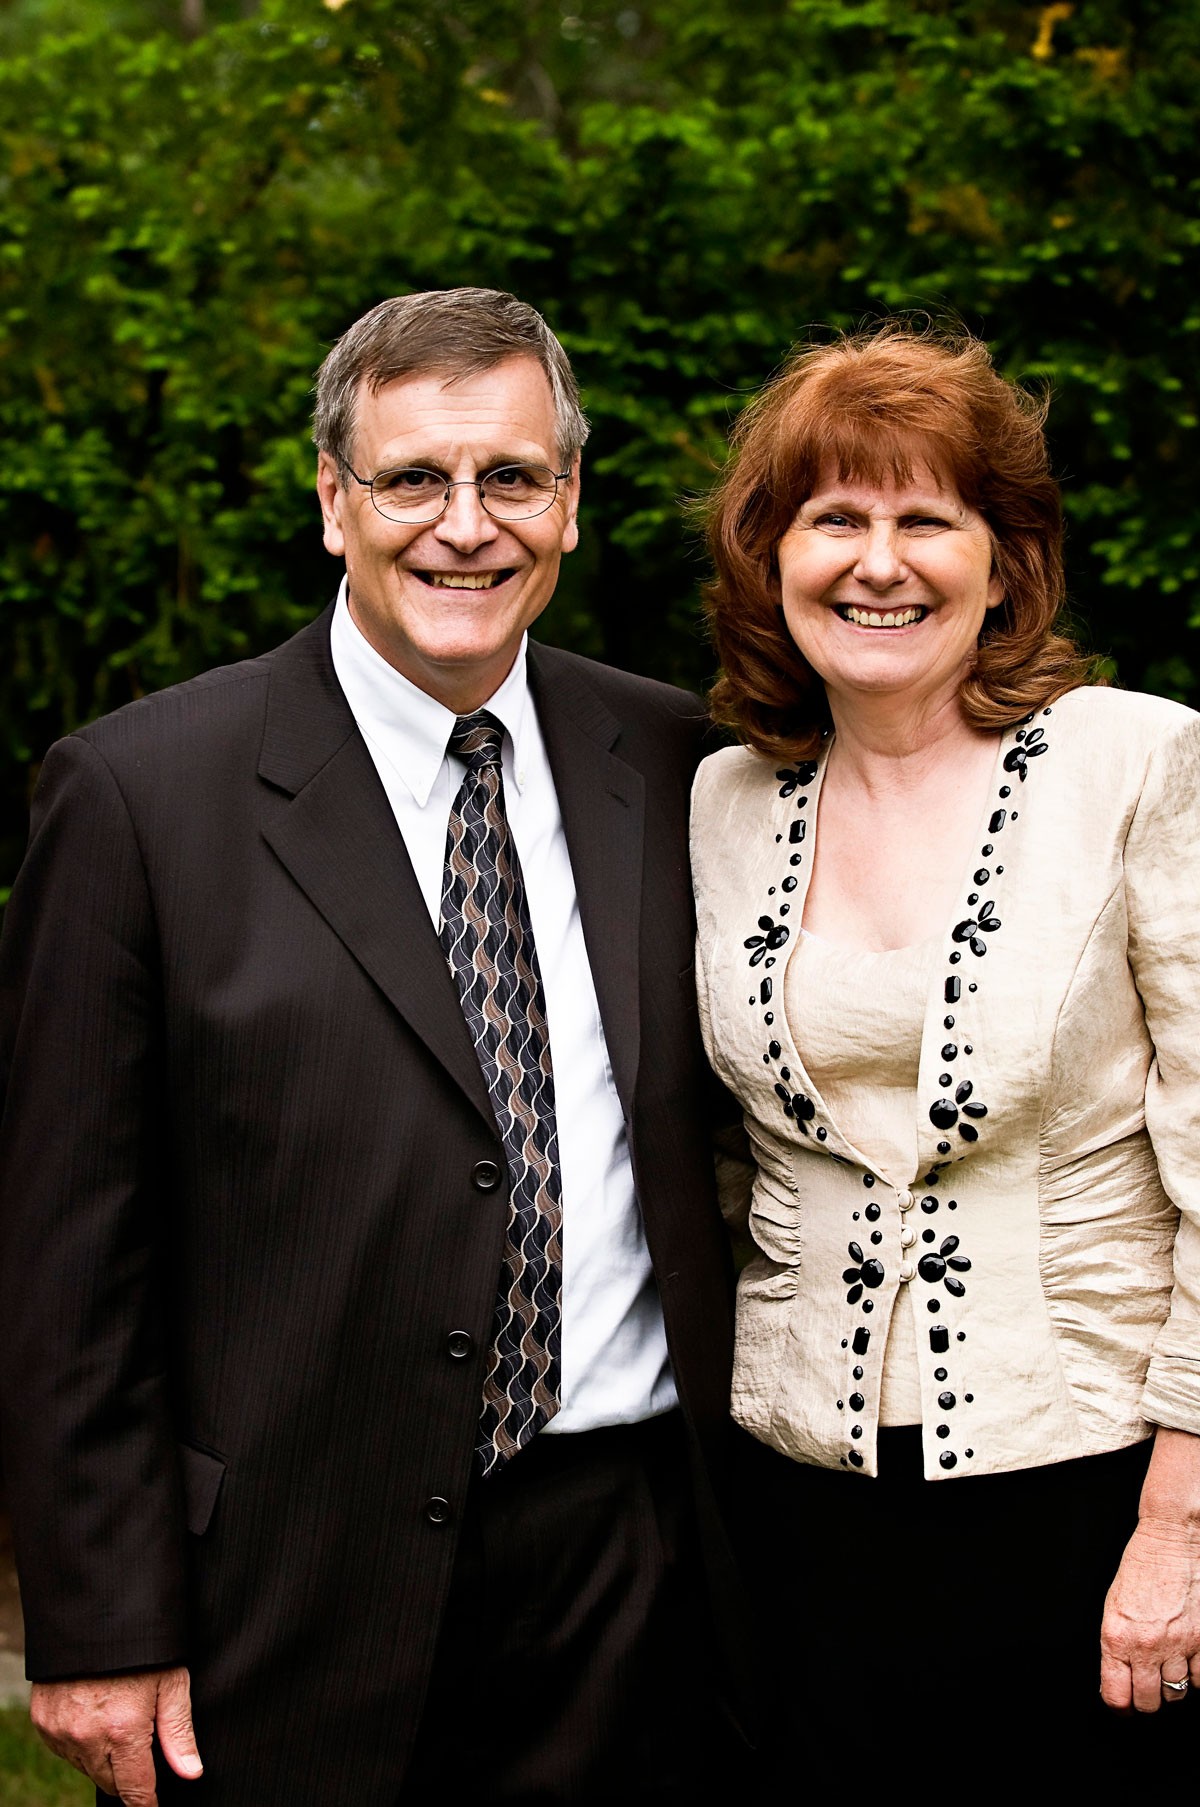 Steve and Vicki Allan pose for a photograph.